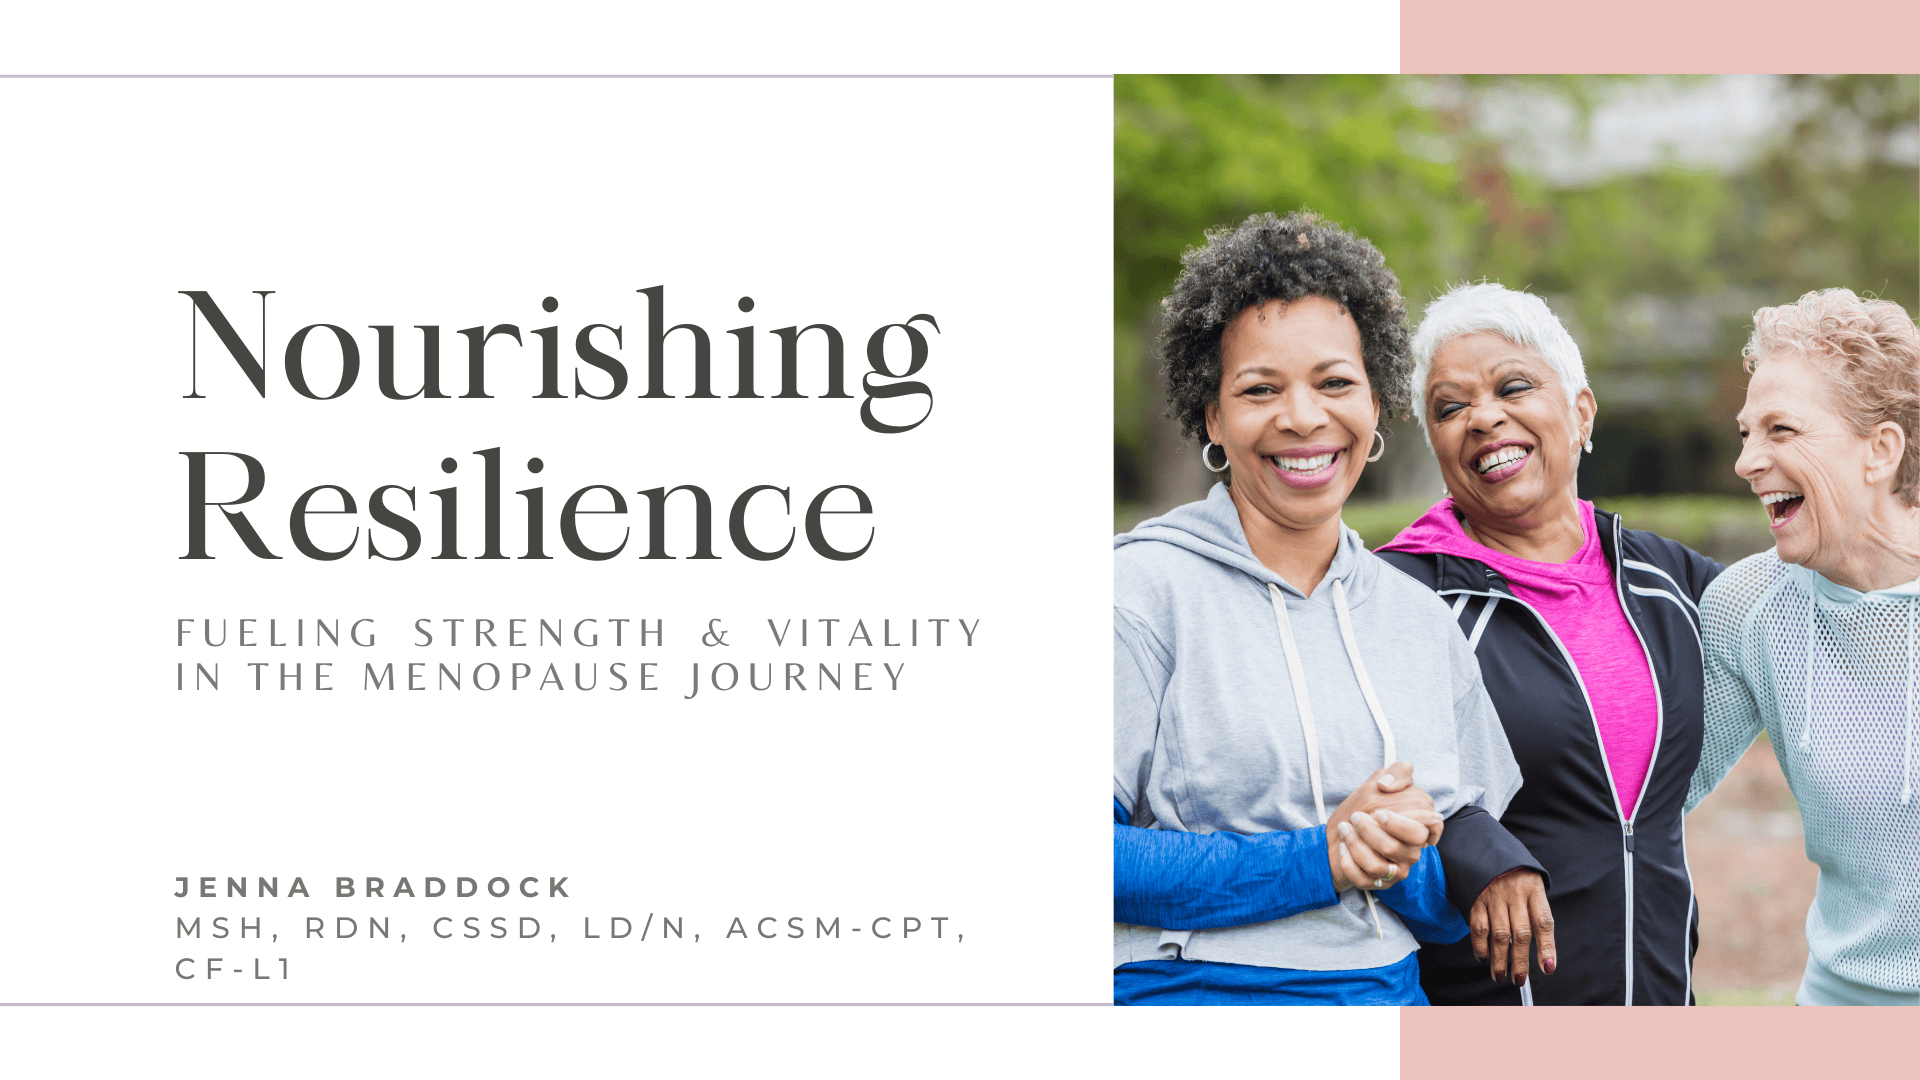 Nourishing Resilience Fueling Strength and vitality in the menopause journey Jenna Braddock